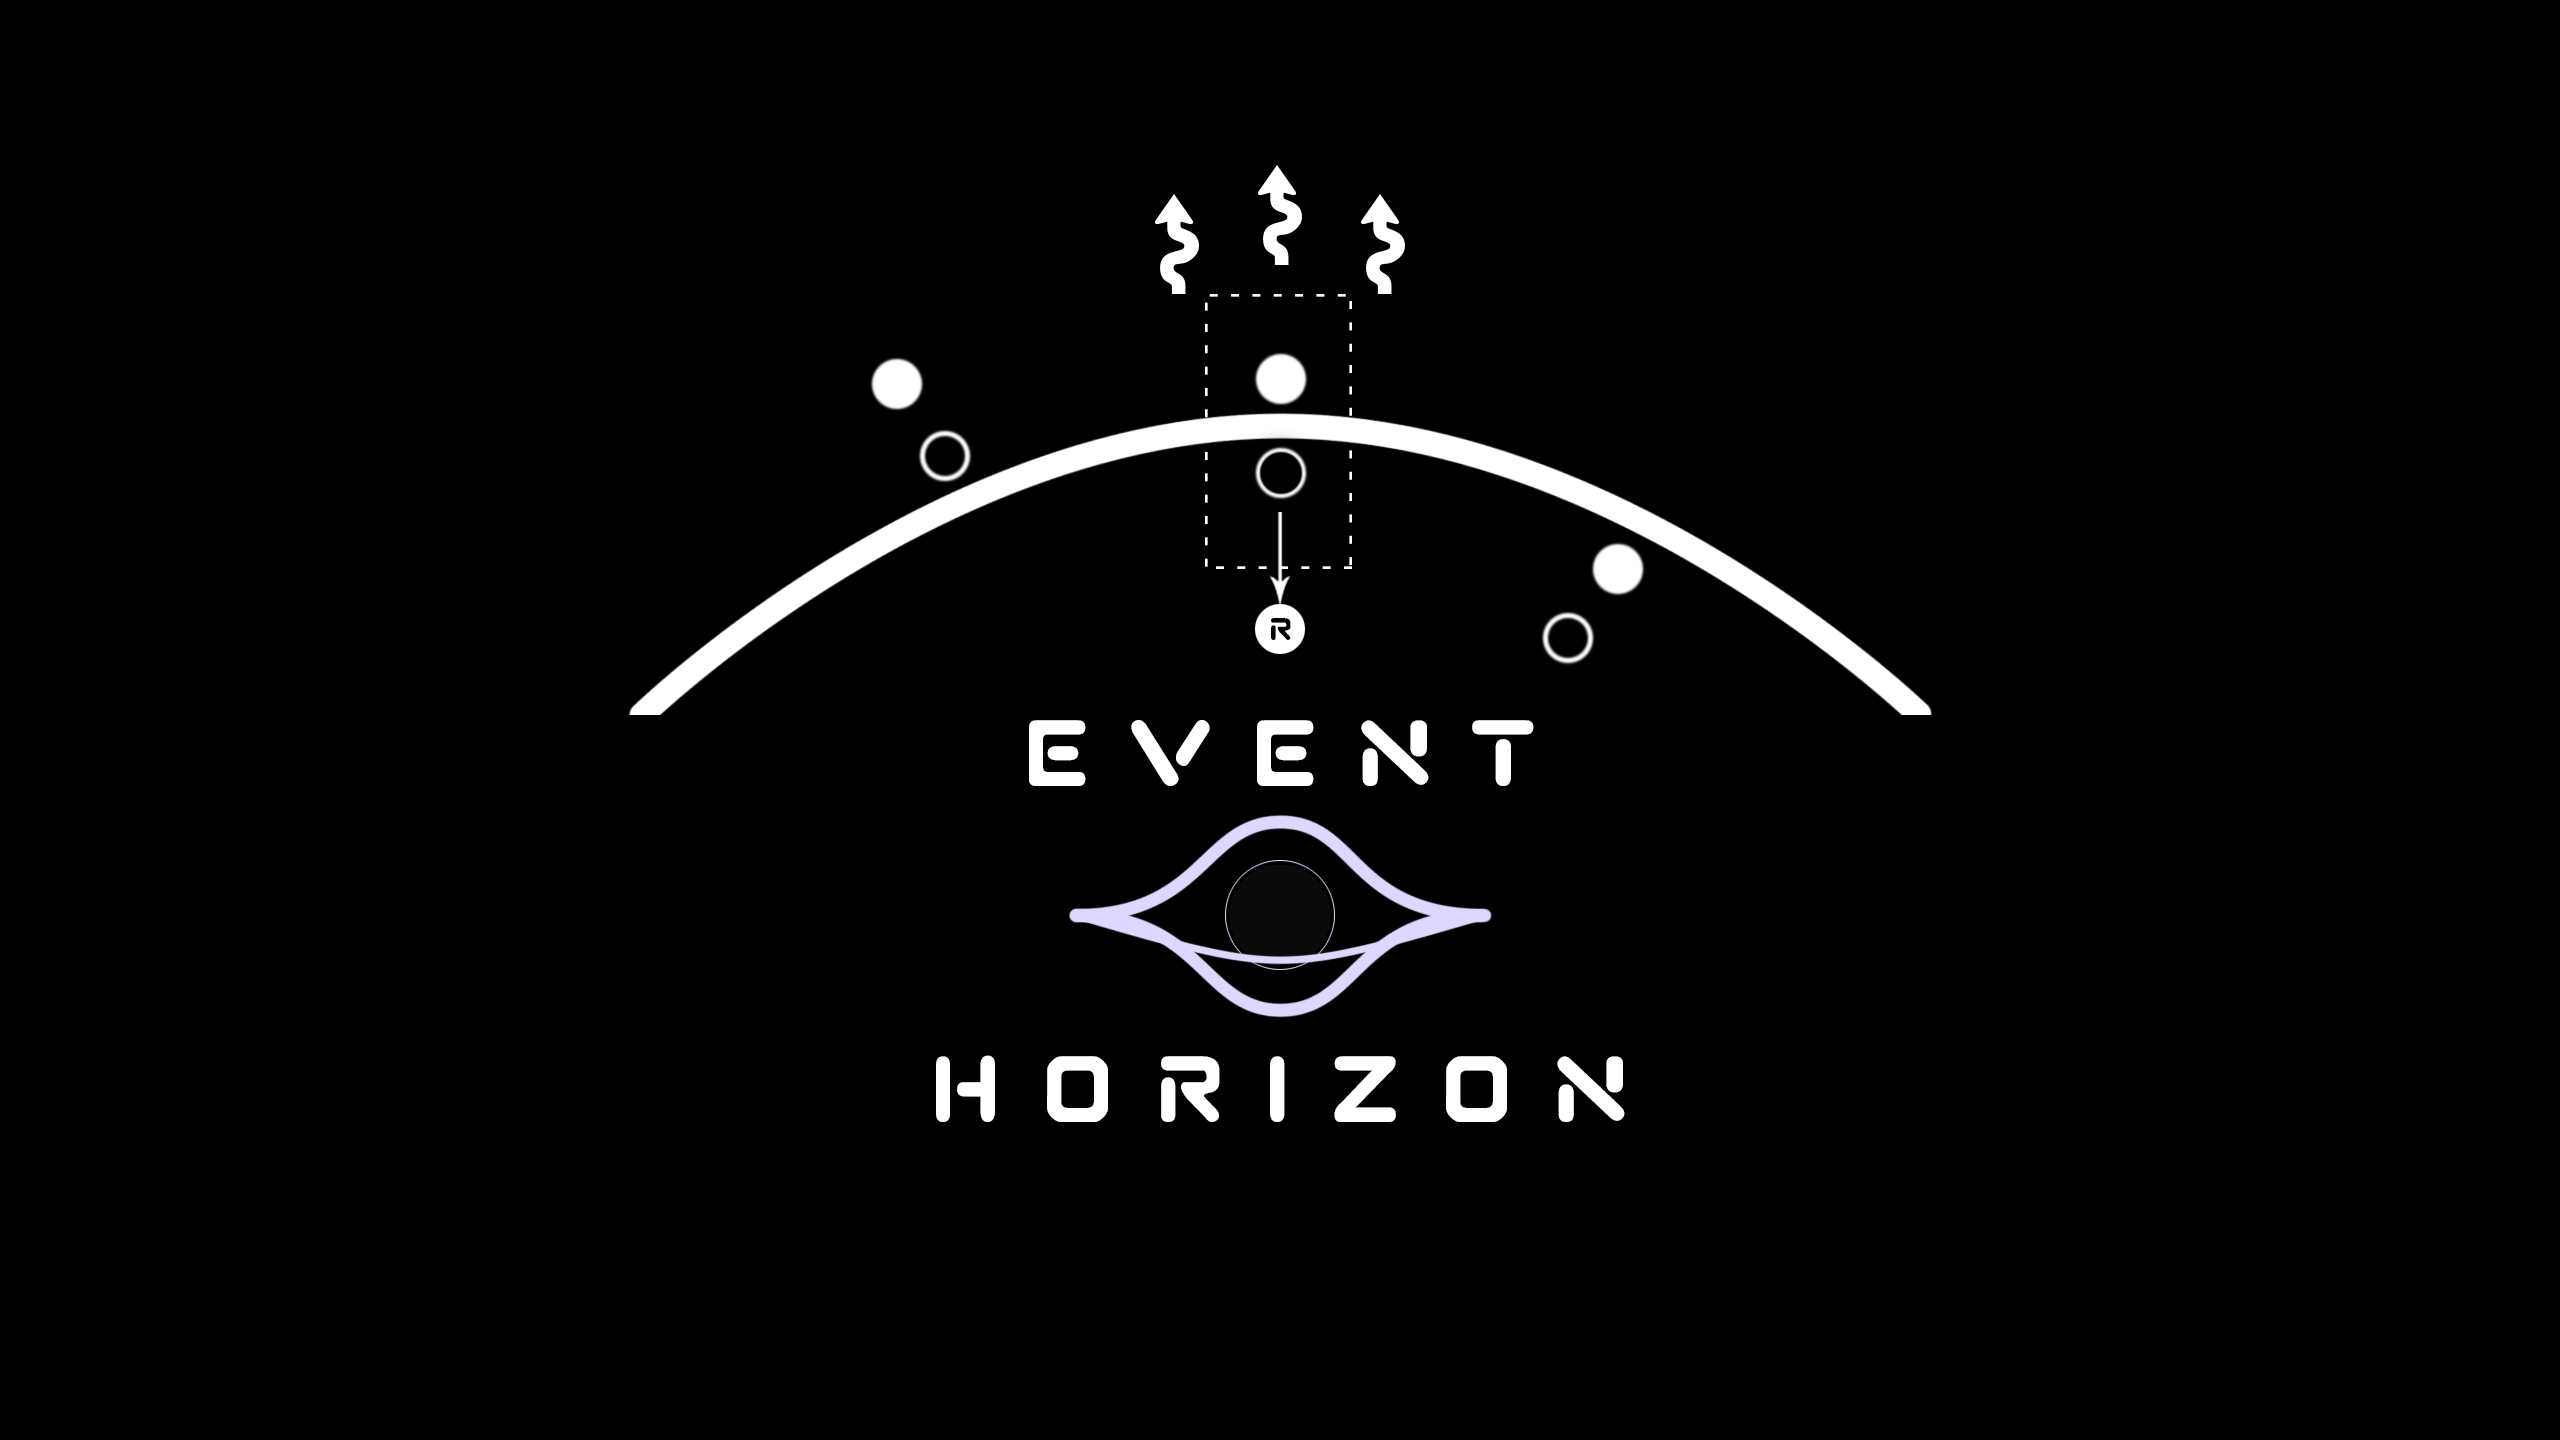 Event Horizon Universe Black Holes Abstract Theoretical Digital Hymmnos 2560x1440